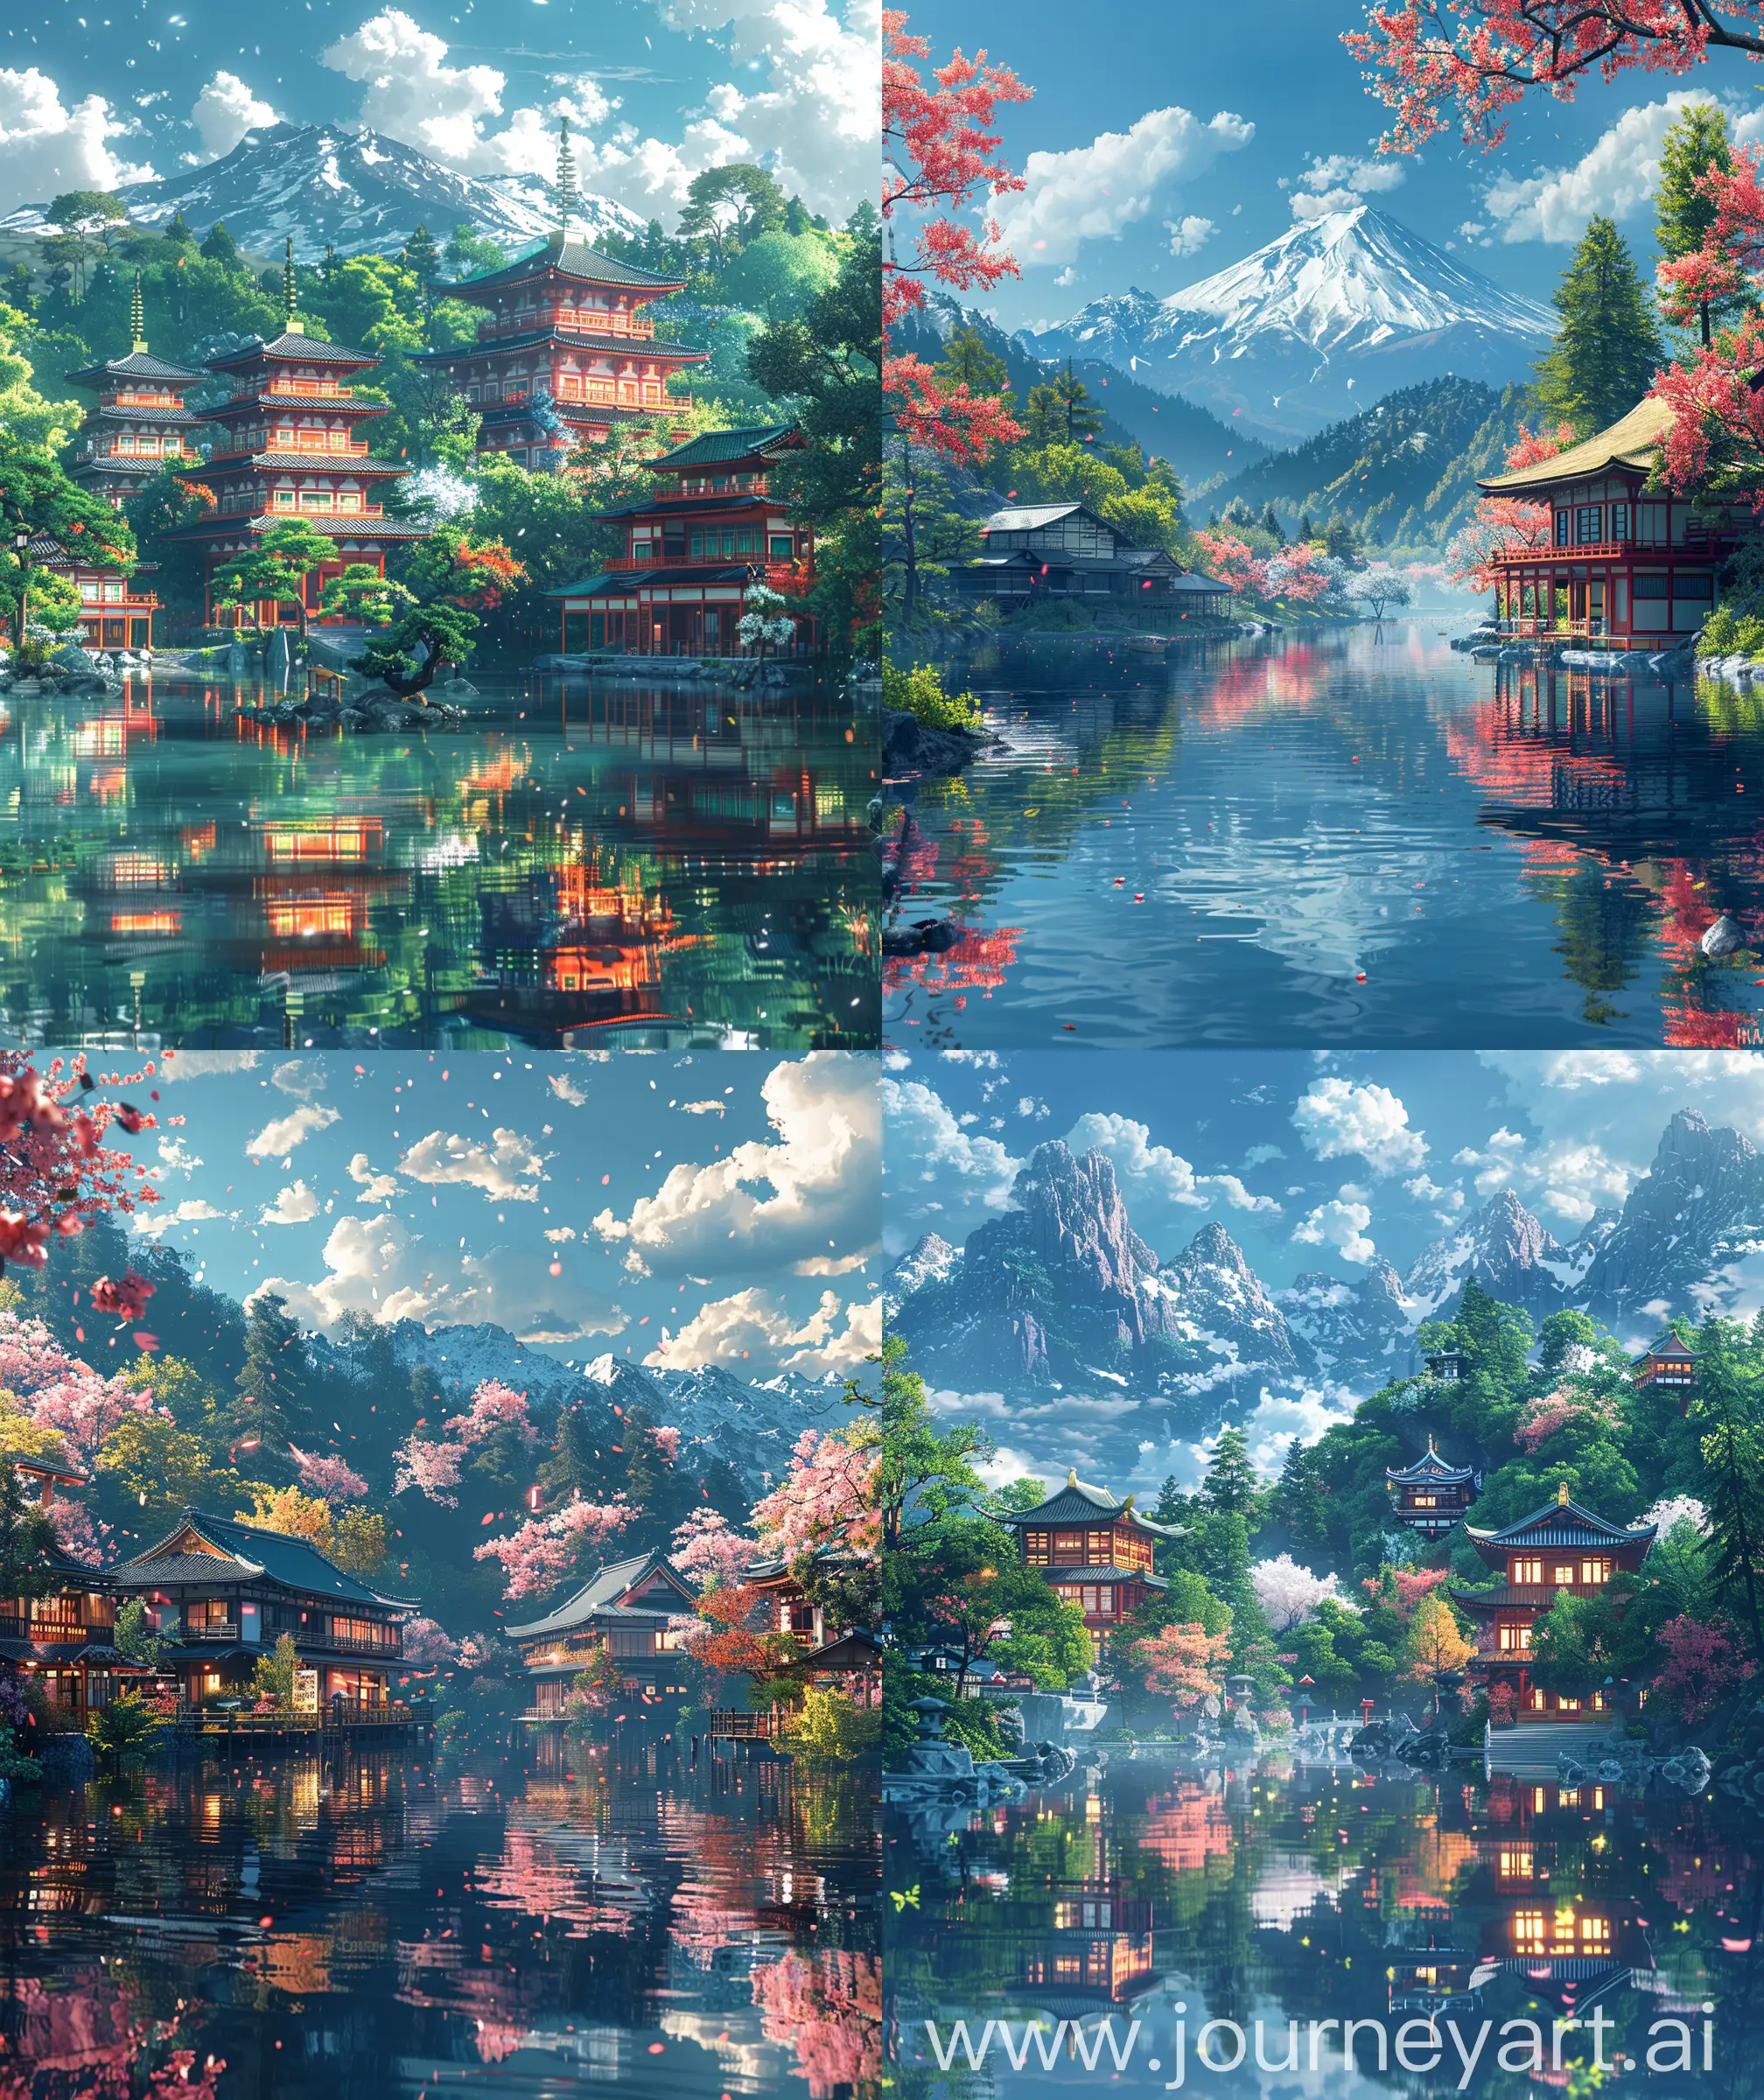 Anime style scenary, mokoto shinkai style, illustration, verious earth's nature scenaries look, majestic and calm look, spring time, anime style different places, direct front facade, water reflection, calm and quiet look, anime style , serenity, ultra HD, high quality, sharp details, High resolution, illustration, no blurry, no hyperrealistic --ar 27:32 --s 600